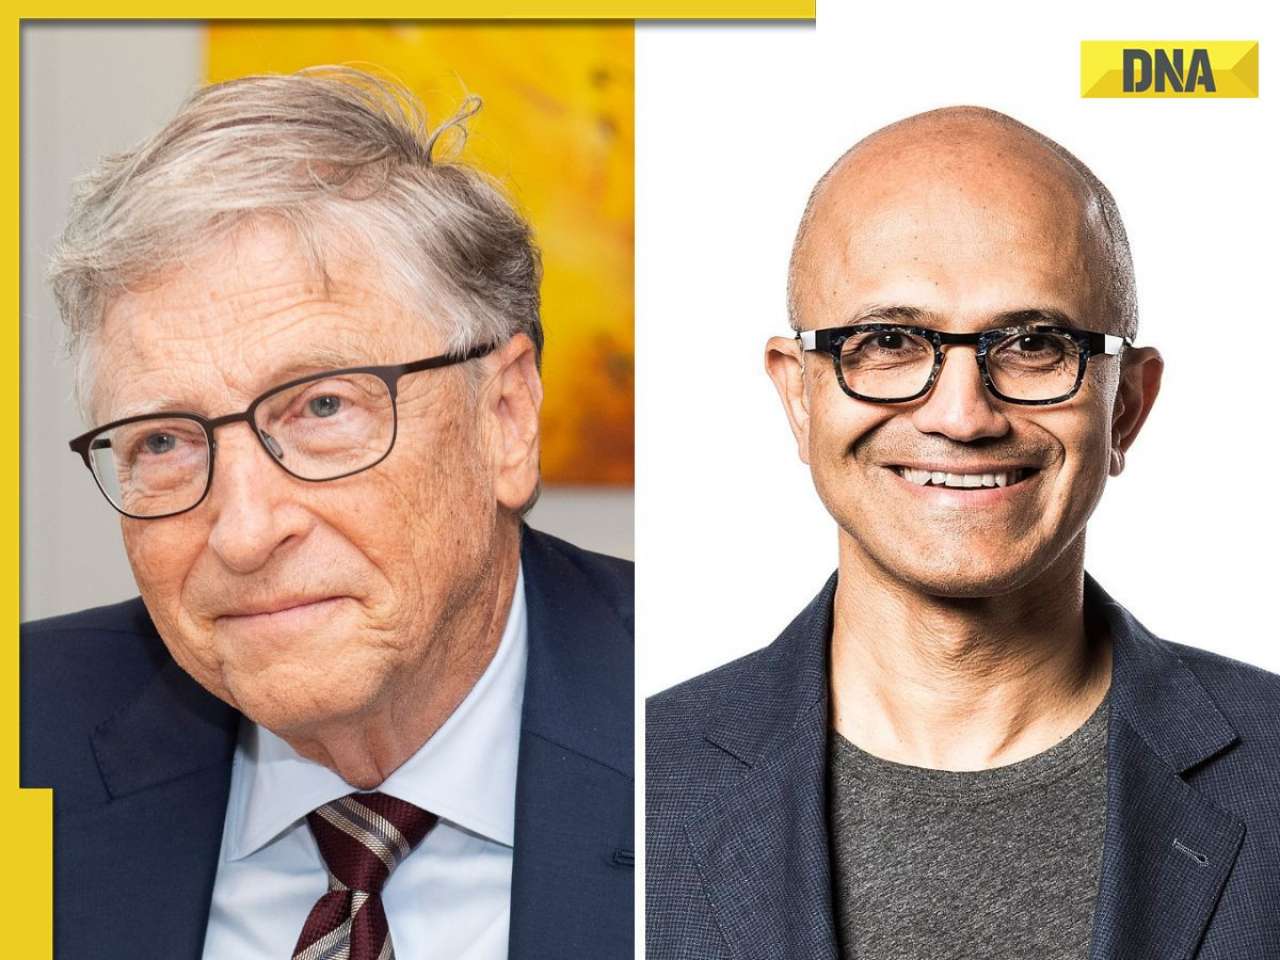 Bill Gates or Satya Nadella, who is the owner of Microsoft, what is the company's net worth?